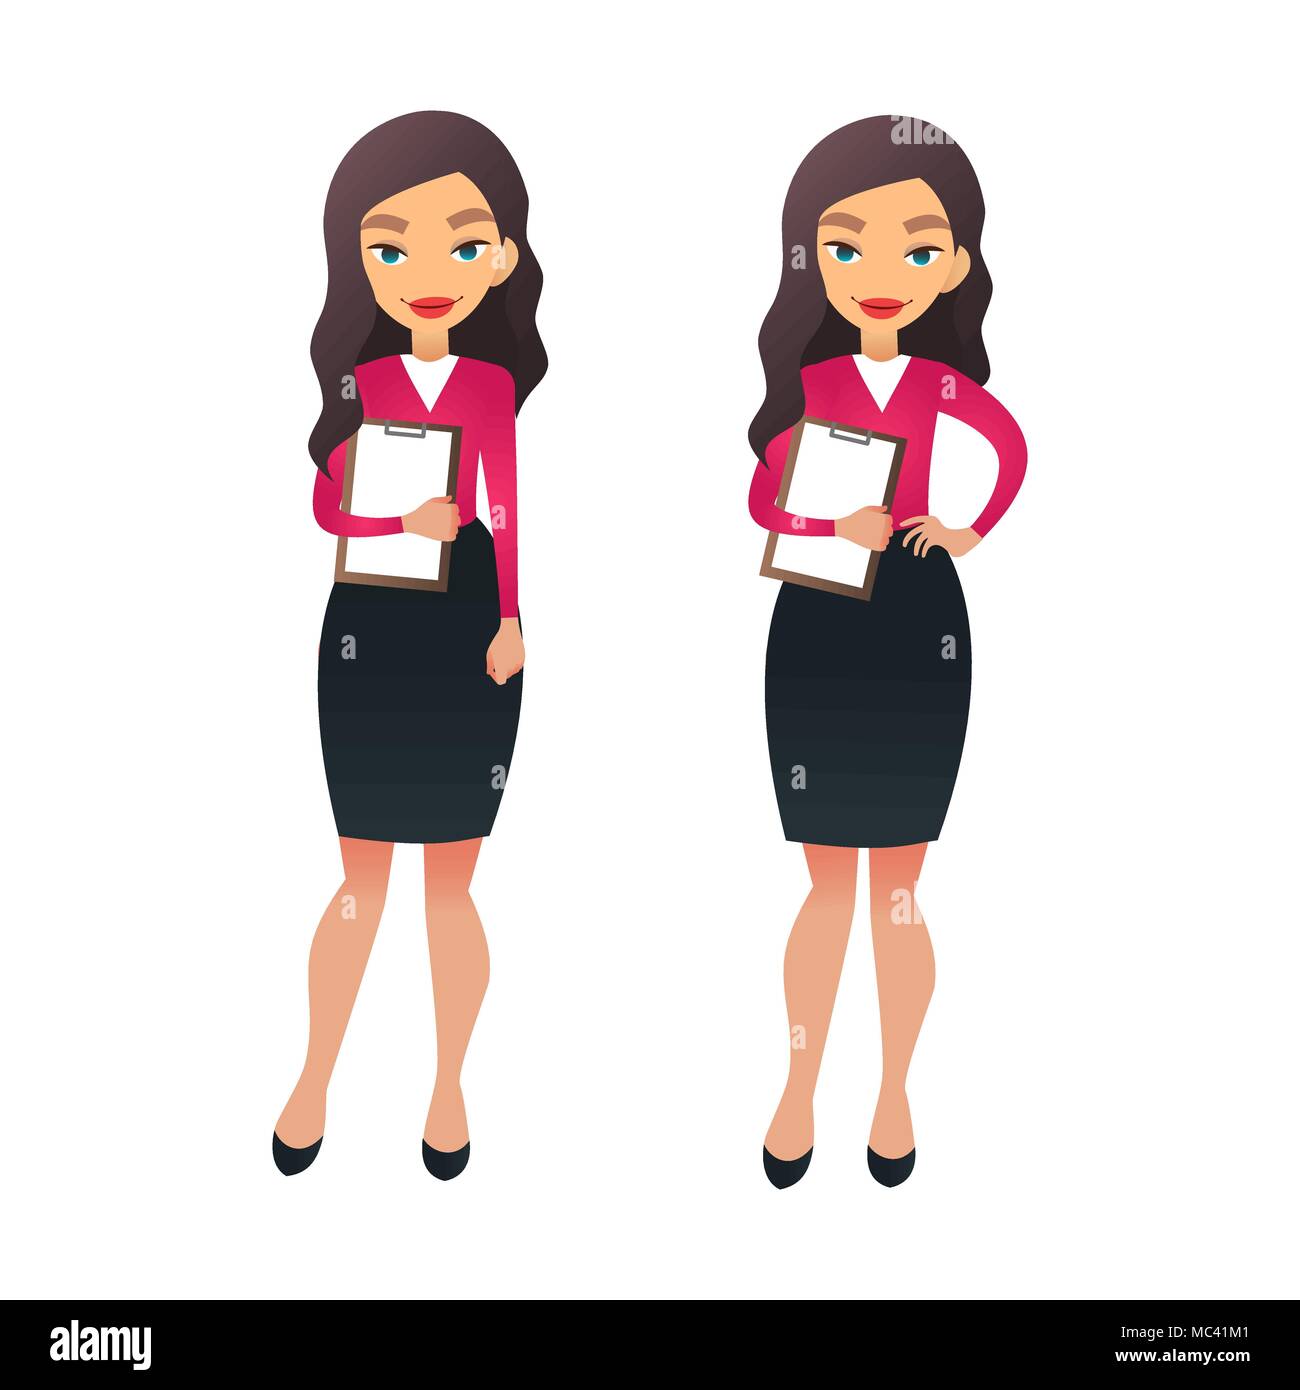 Set character businesswoman in various poses. Cartoon vector secretary or teacher on different working situations. Smiling business woman flat character on a white background. Stock Vector